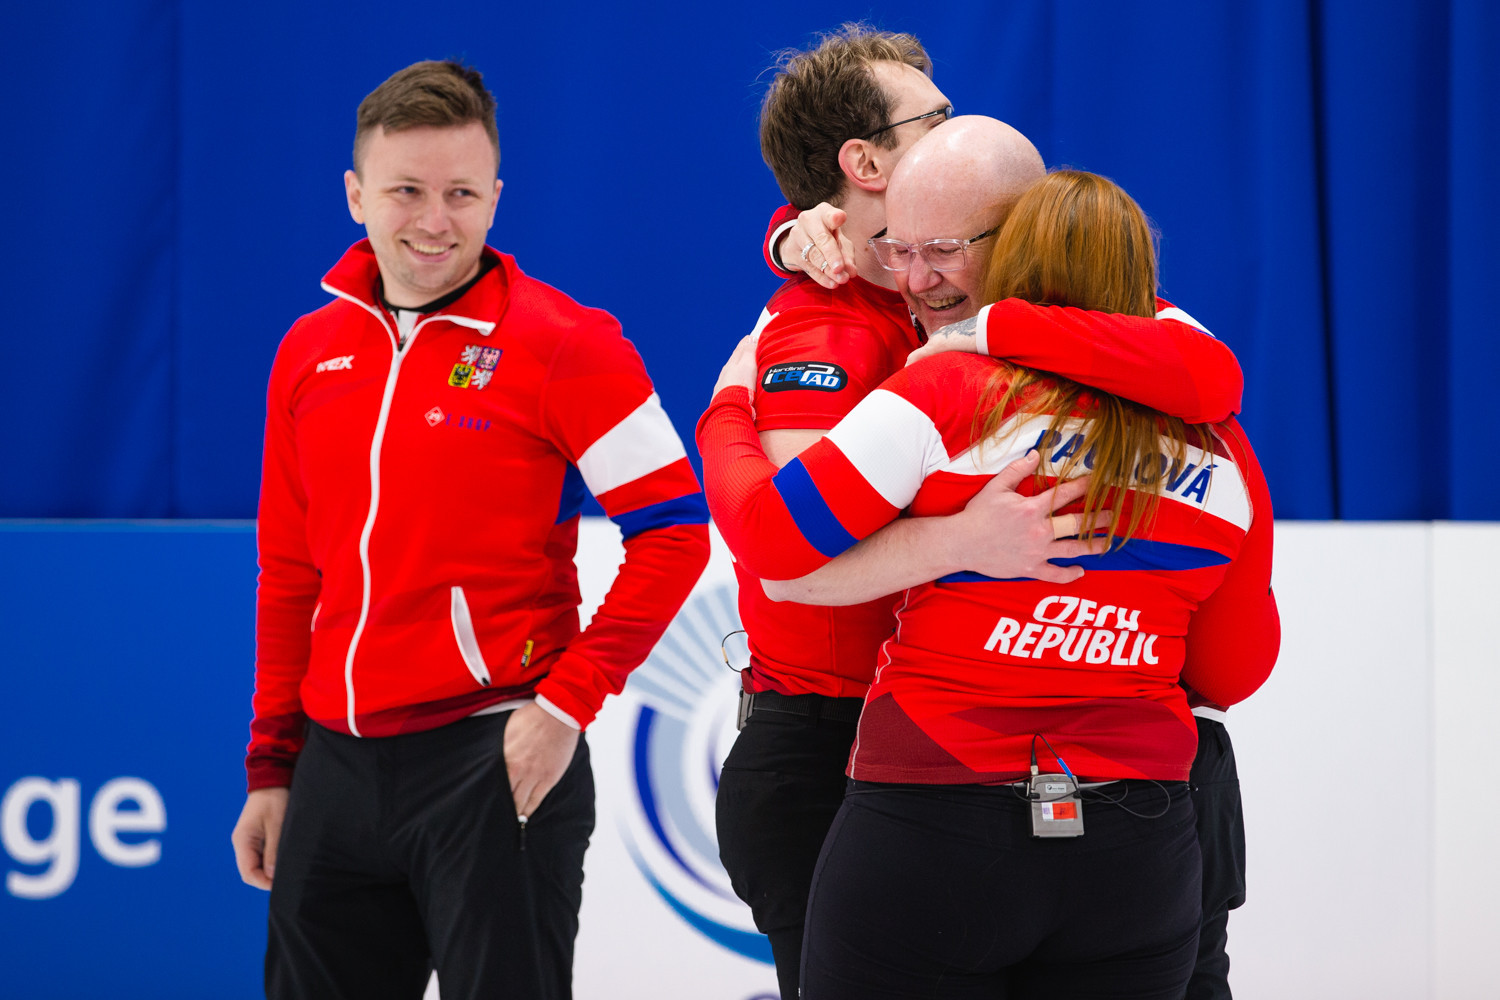 The Czech Republic team celebrate qualifying for Beijing 2022 in the mixed doubles curling discipline ©WCF/Celine Stucki